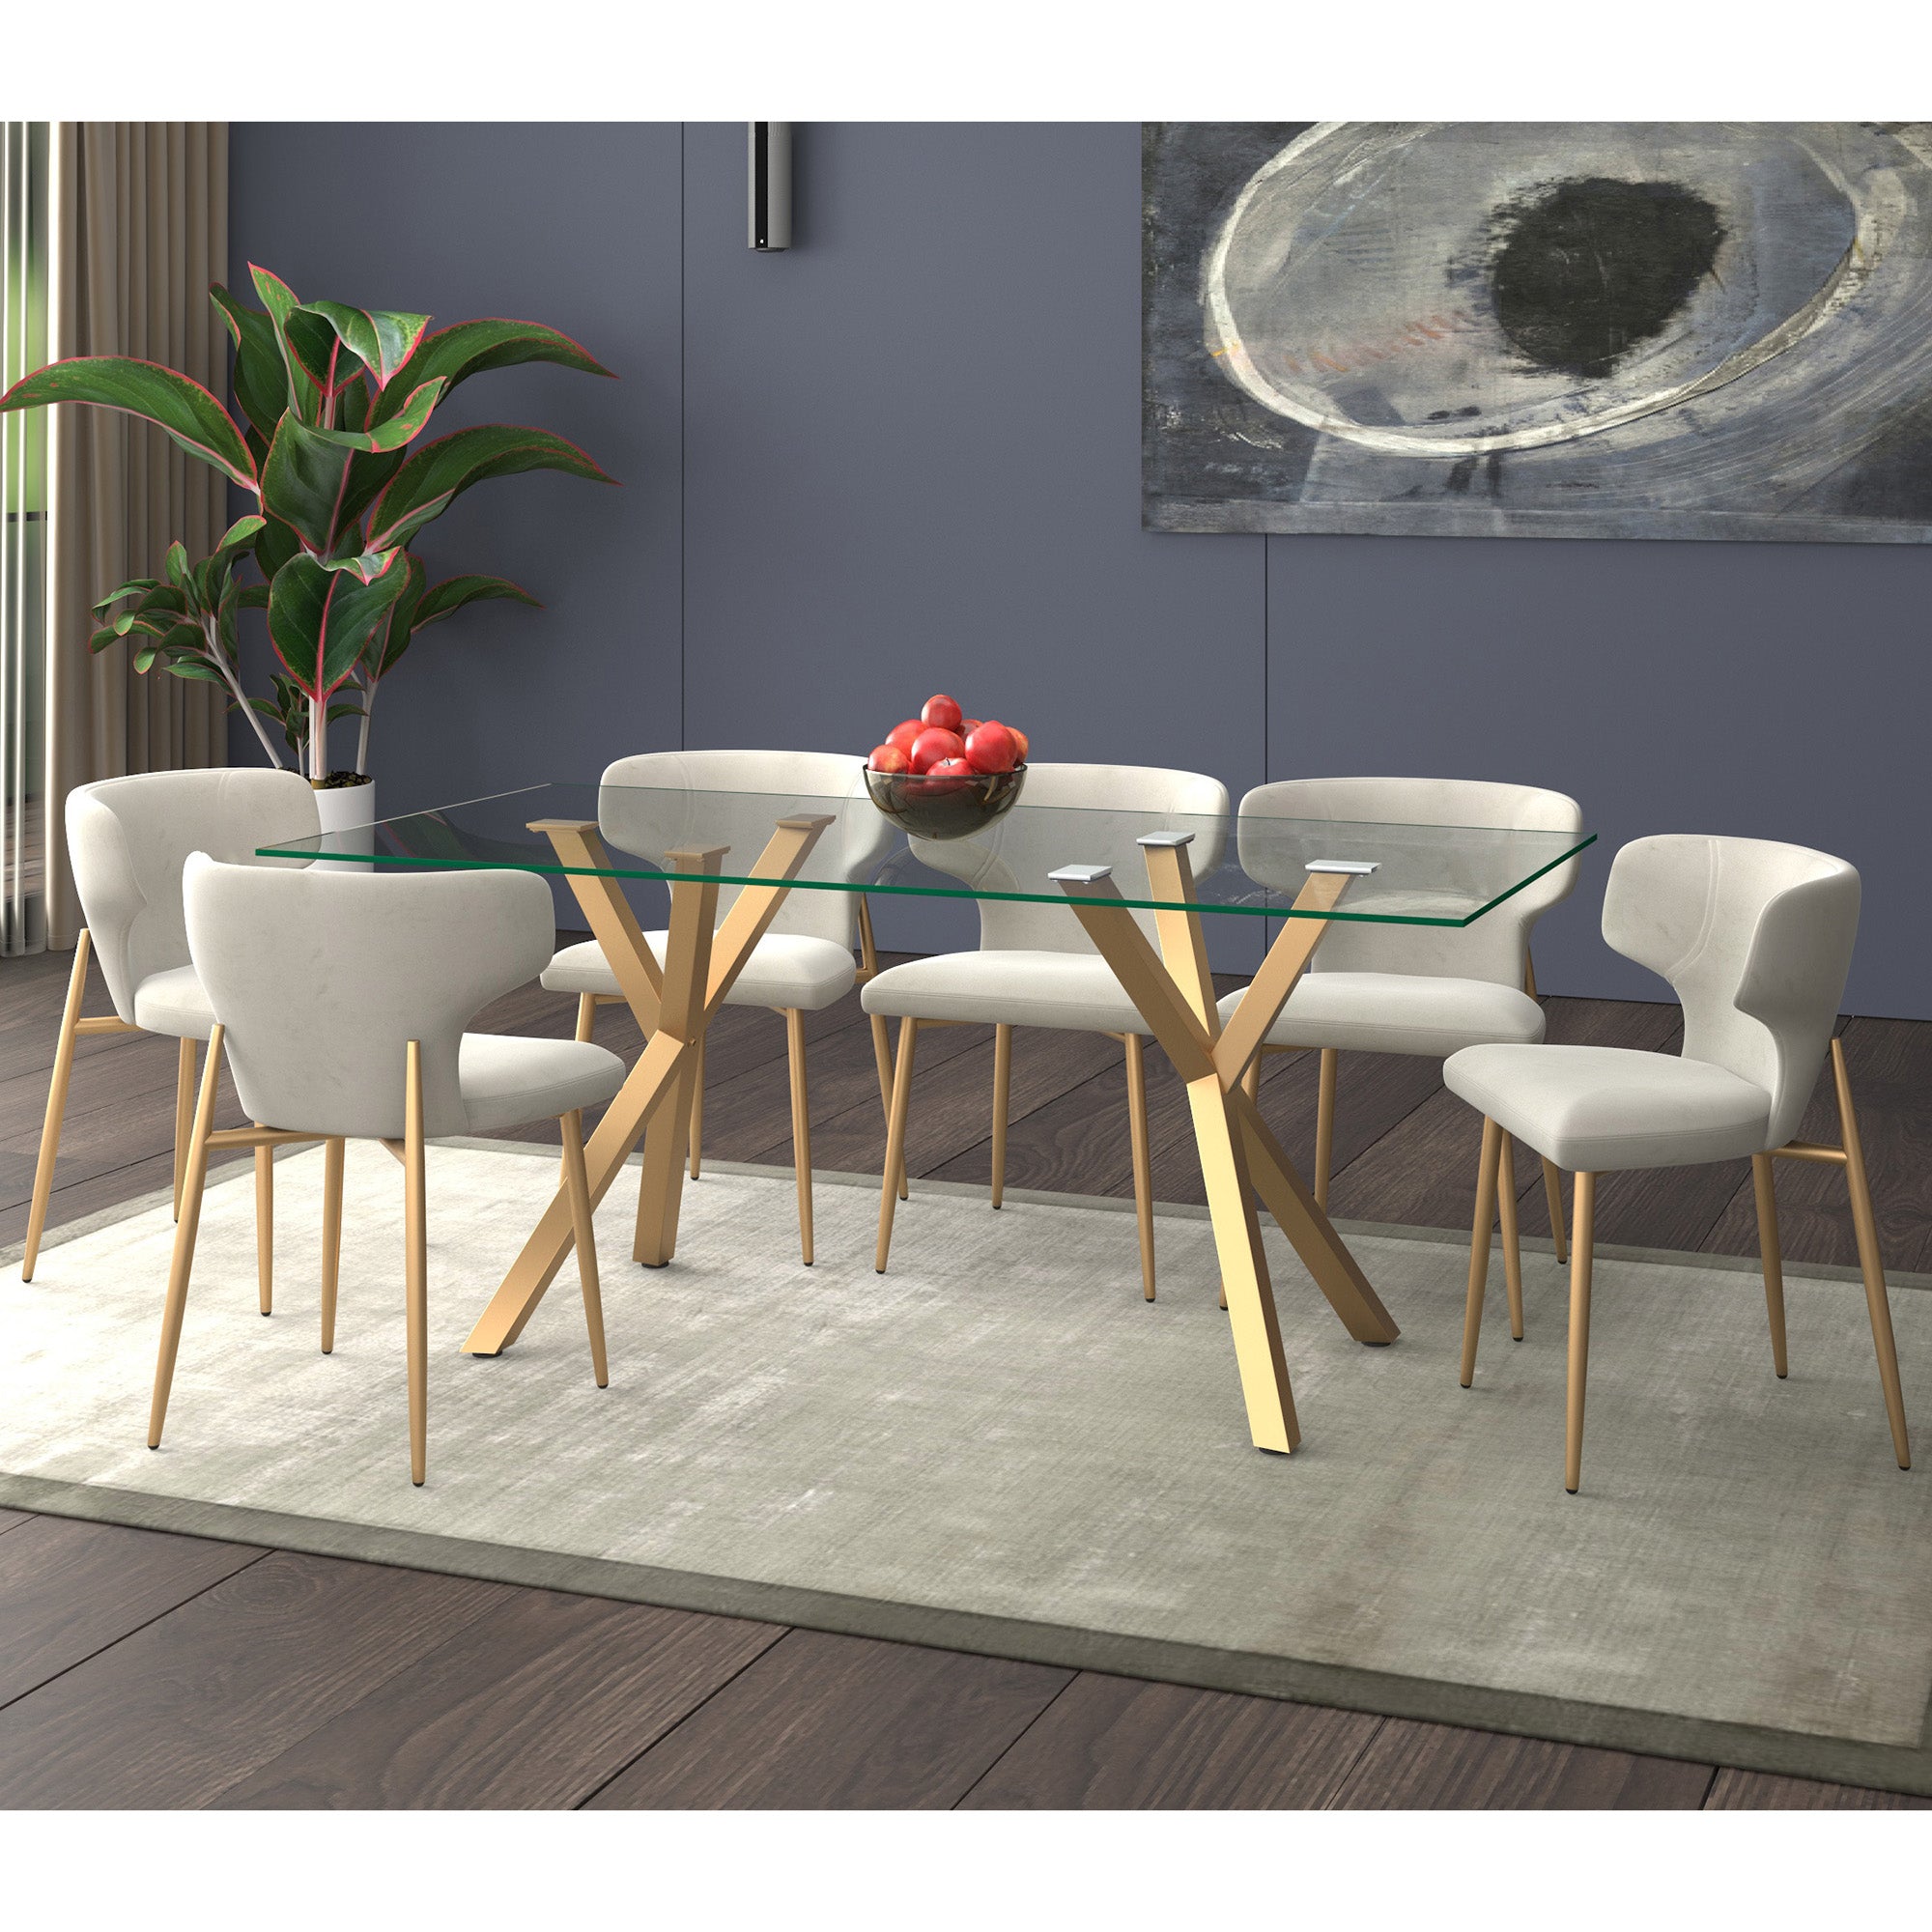 STARK 71" GLASS DINING TABLE GOLD  /AKIRA GREY CHAIRS - 7PC DINING SET